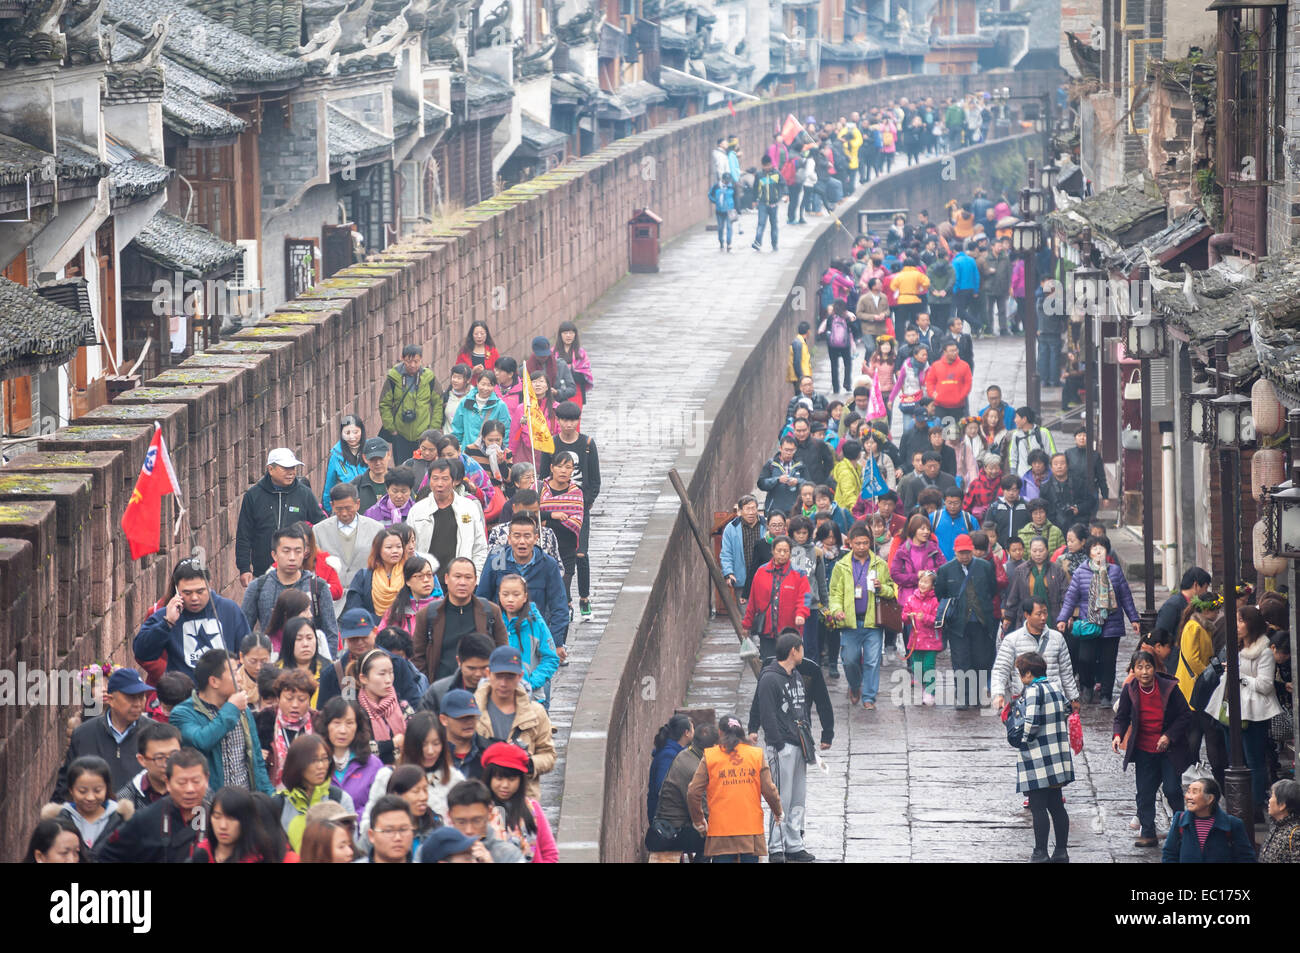 Crowds of tourists walk along the ancient city walls at Fenghuang, China Stock Photo